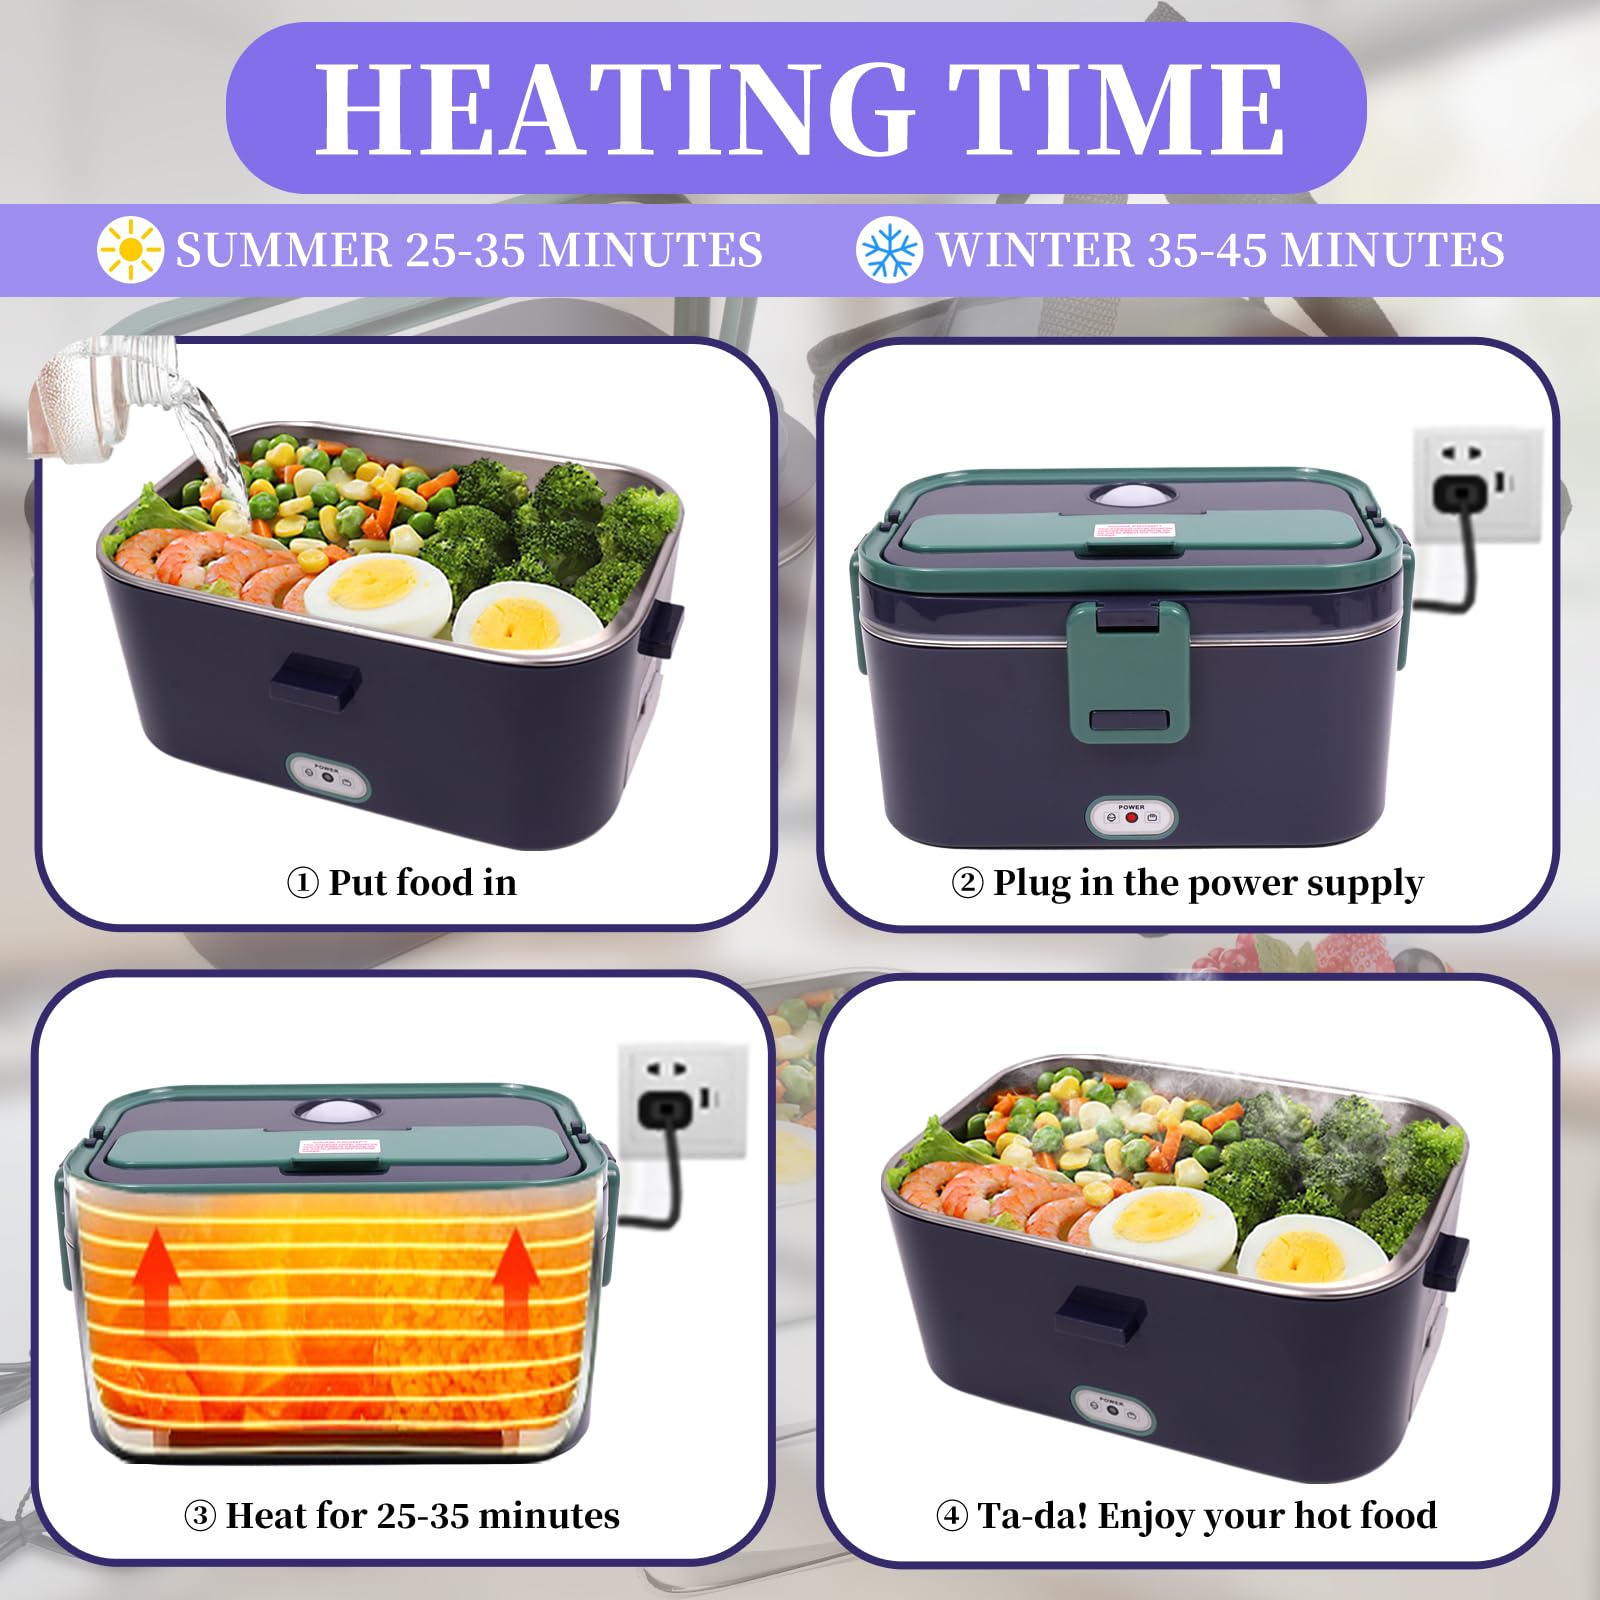 Eleckfun Electric Lunch Box Food Heater, 2 in 1 Heated Lunch Box for Car Truck Home Work Adults Food Heating, Leak Proof, 1.8L Removable Stainless Steel Container, 110V/12V/24V 80W